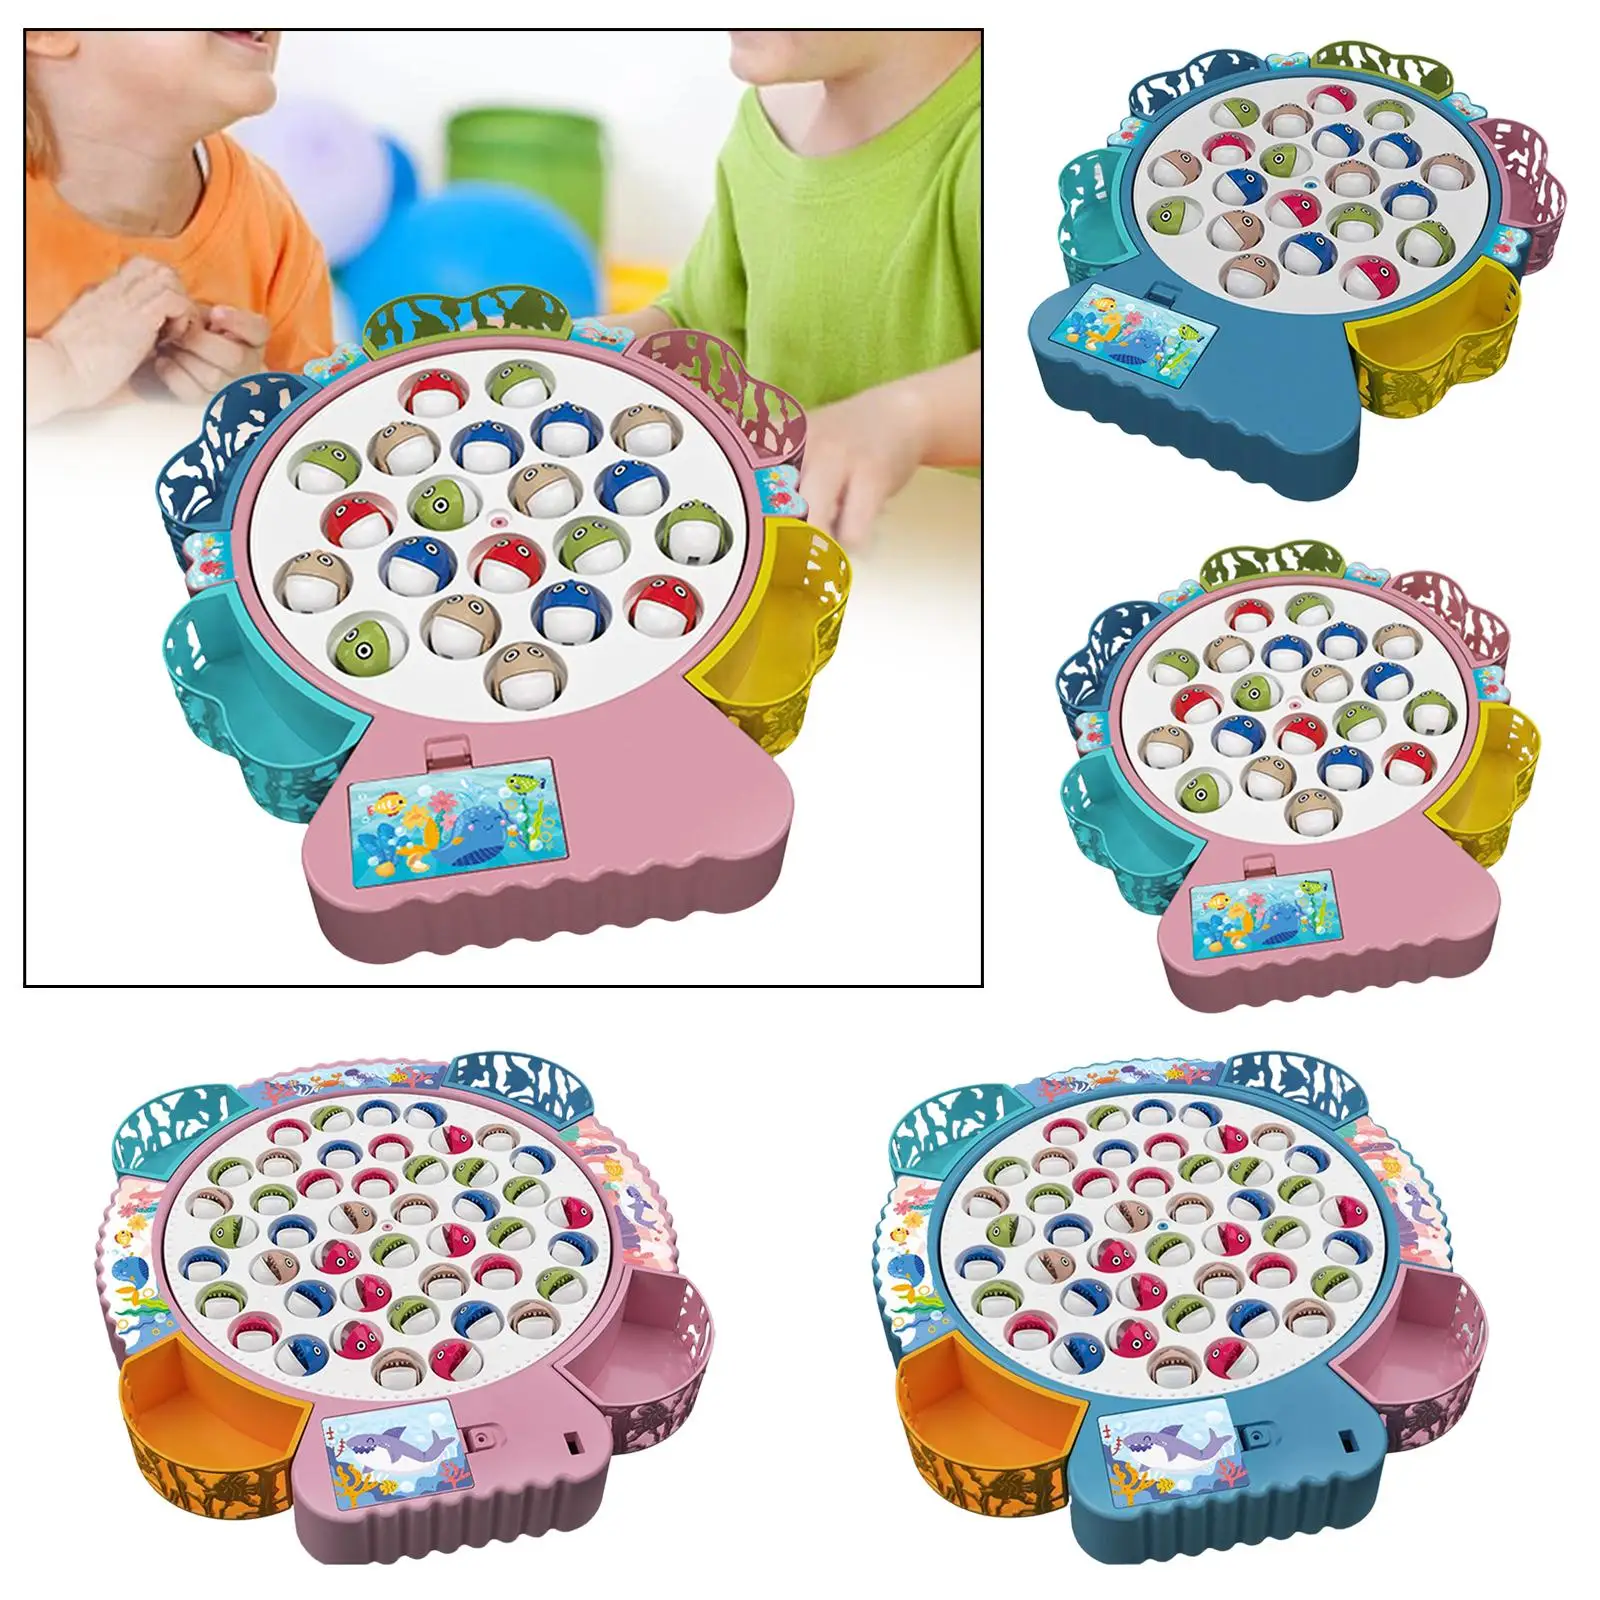 Rotating Fishing Game Birthday Gifts Colorful Practice Motor Skills Electric Fishing Toy for Preschool Toddlers Age 3 4 5 6 7